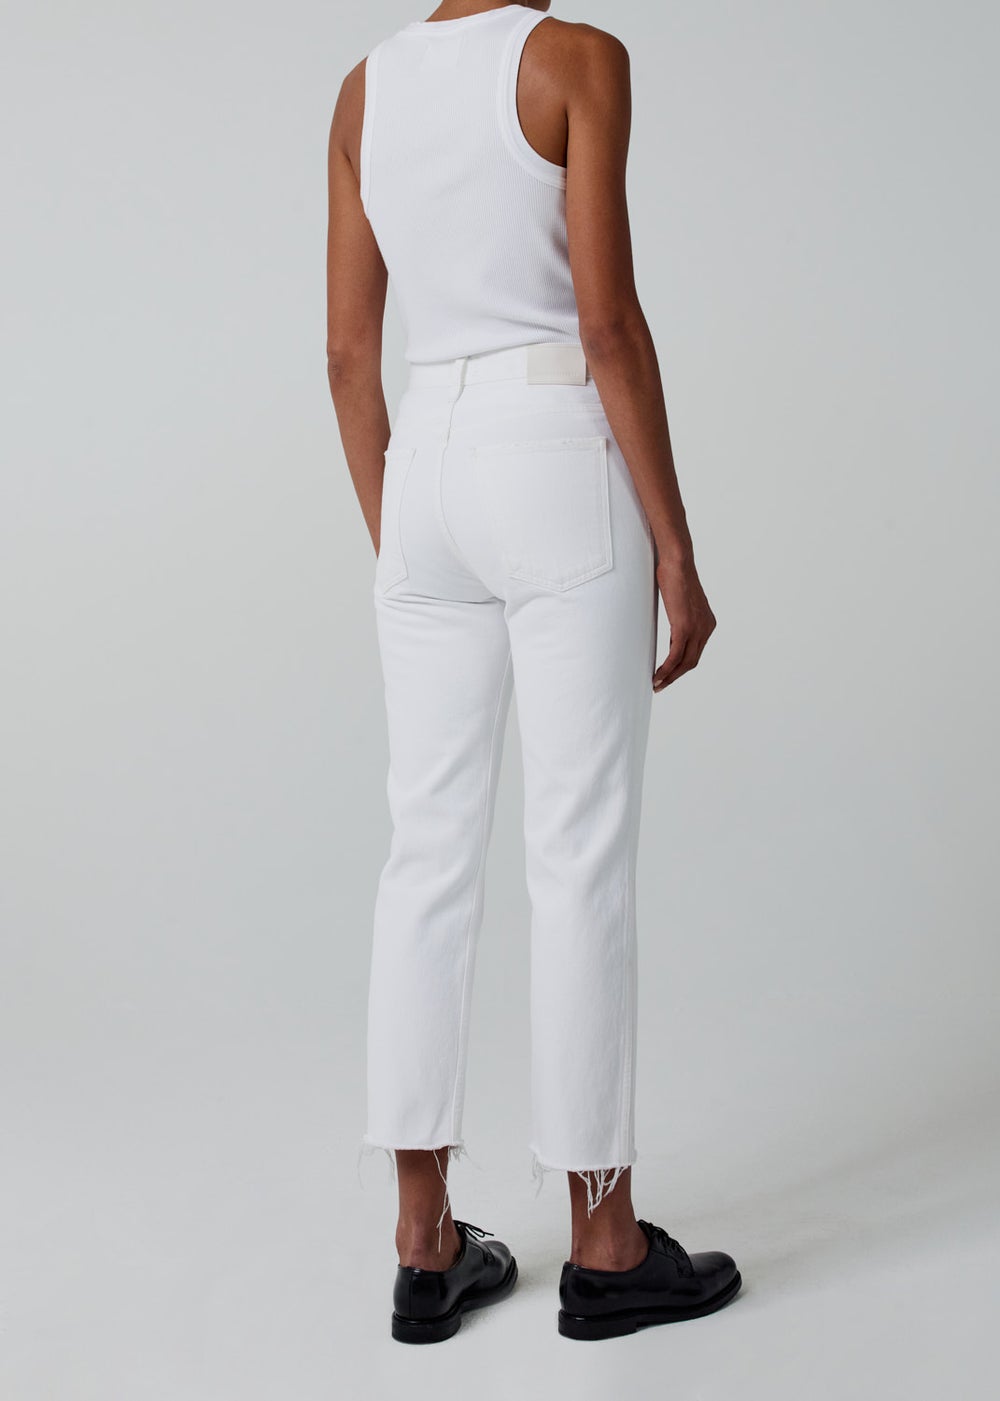 DAPHNE HIGH RISE STOVEPIPE CROP JEAN IN SAIL